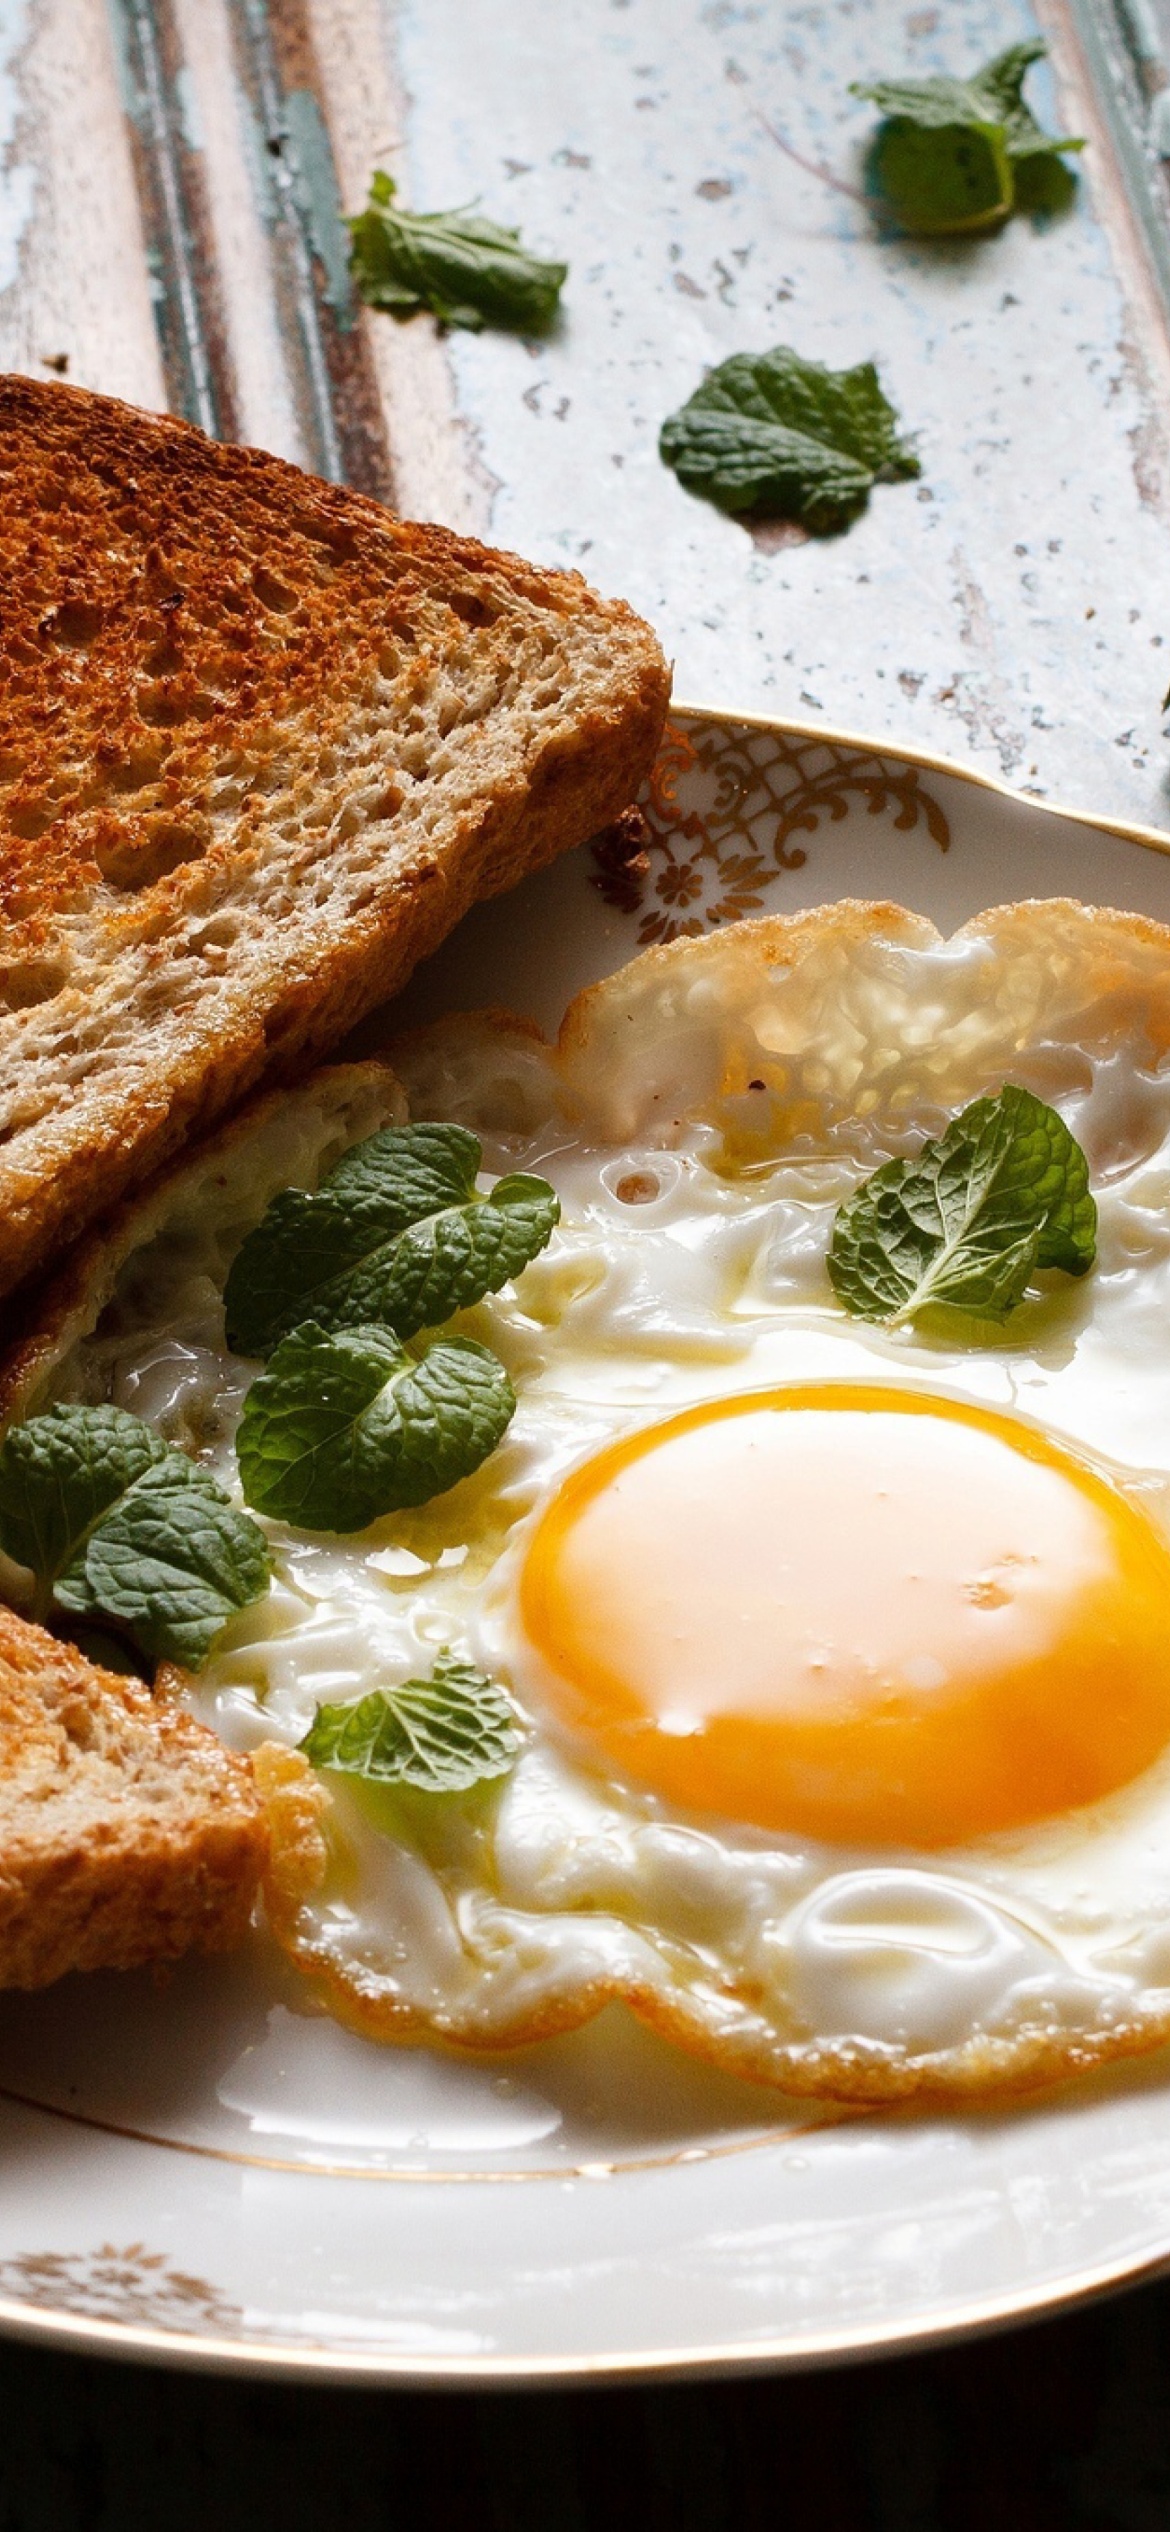 Breakfast eggs and toast wallpaper 1170x2532